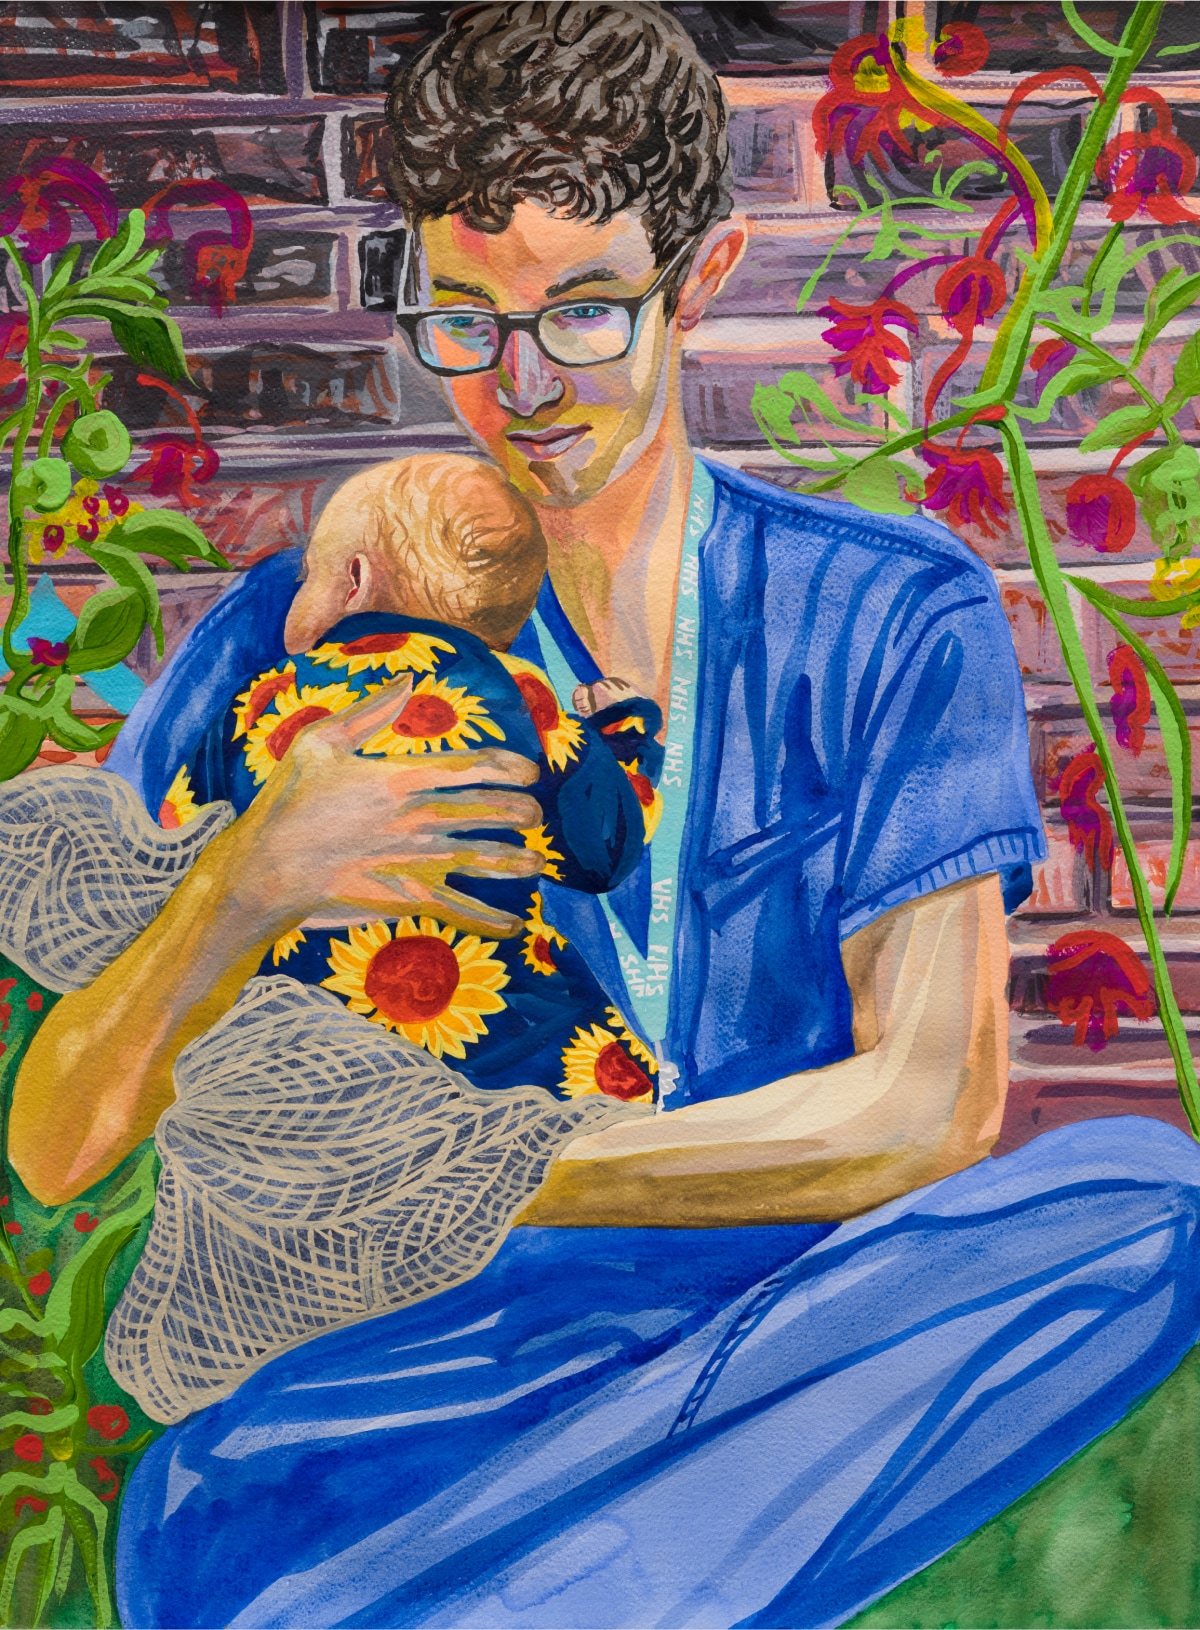 Artwork featuring a young man in blue scrubs holding a baby wearing a sunfloor onesie